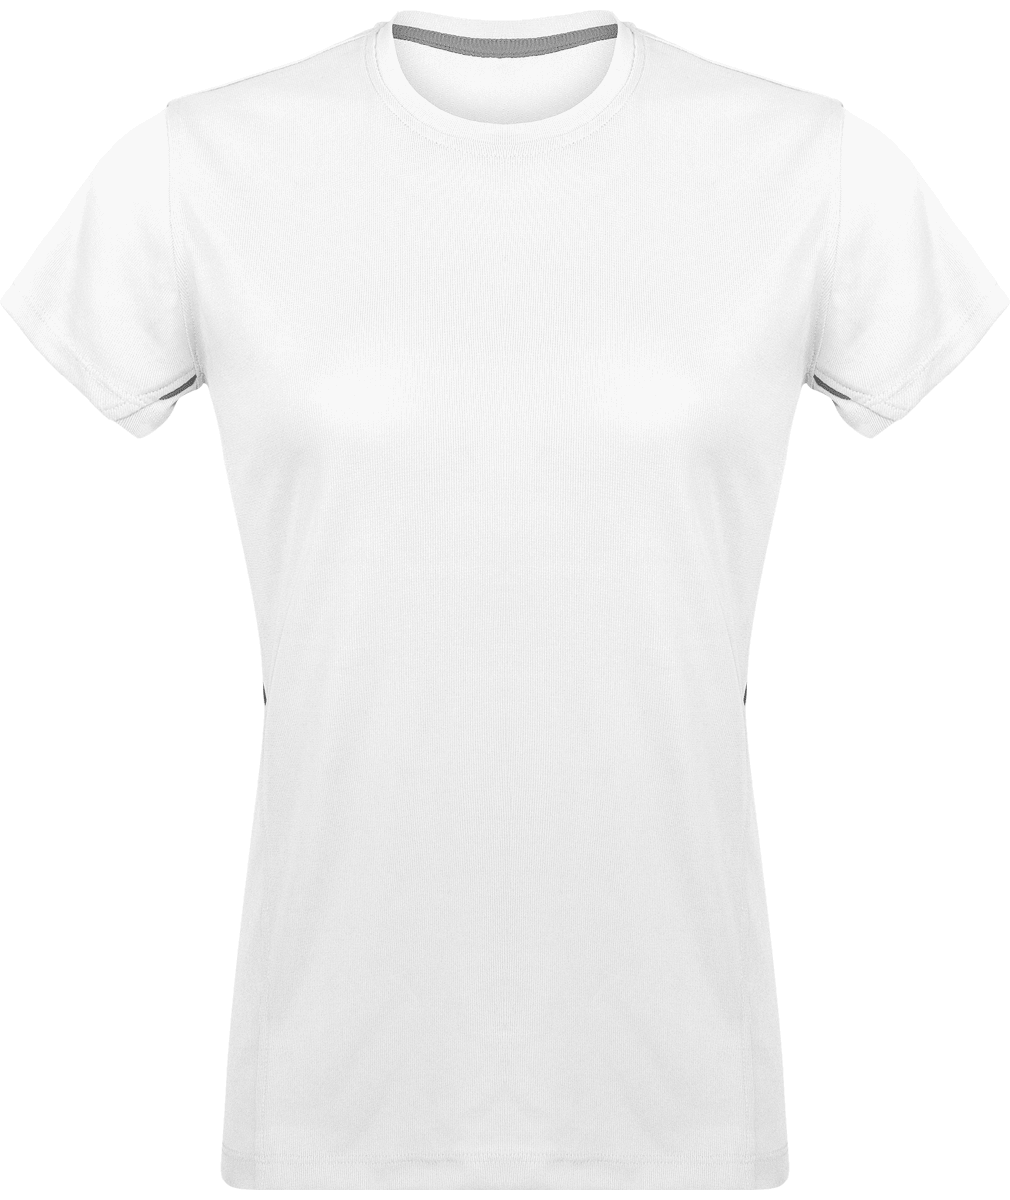 Women's Sports T-Shirt | Light And Breathable | Bi-Material White / Silver